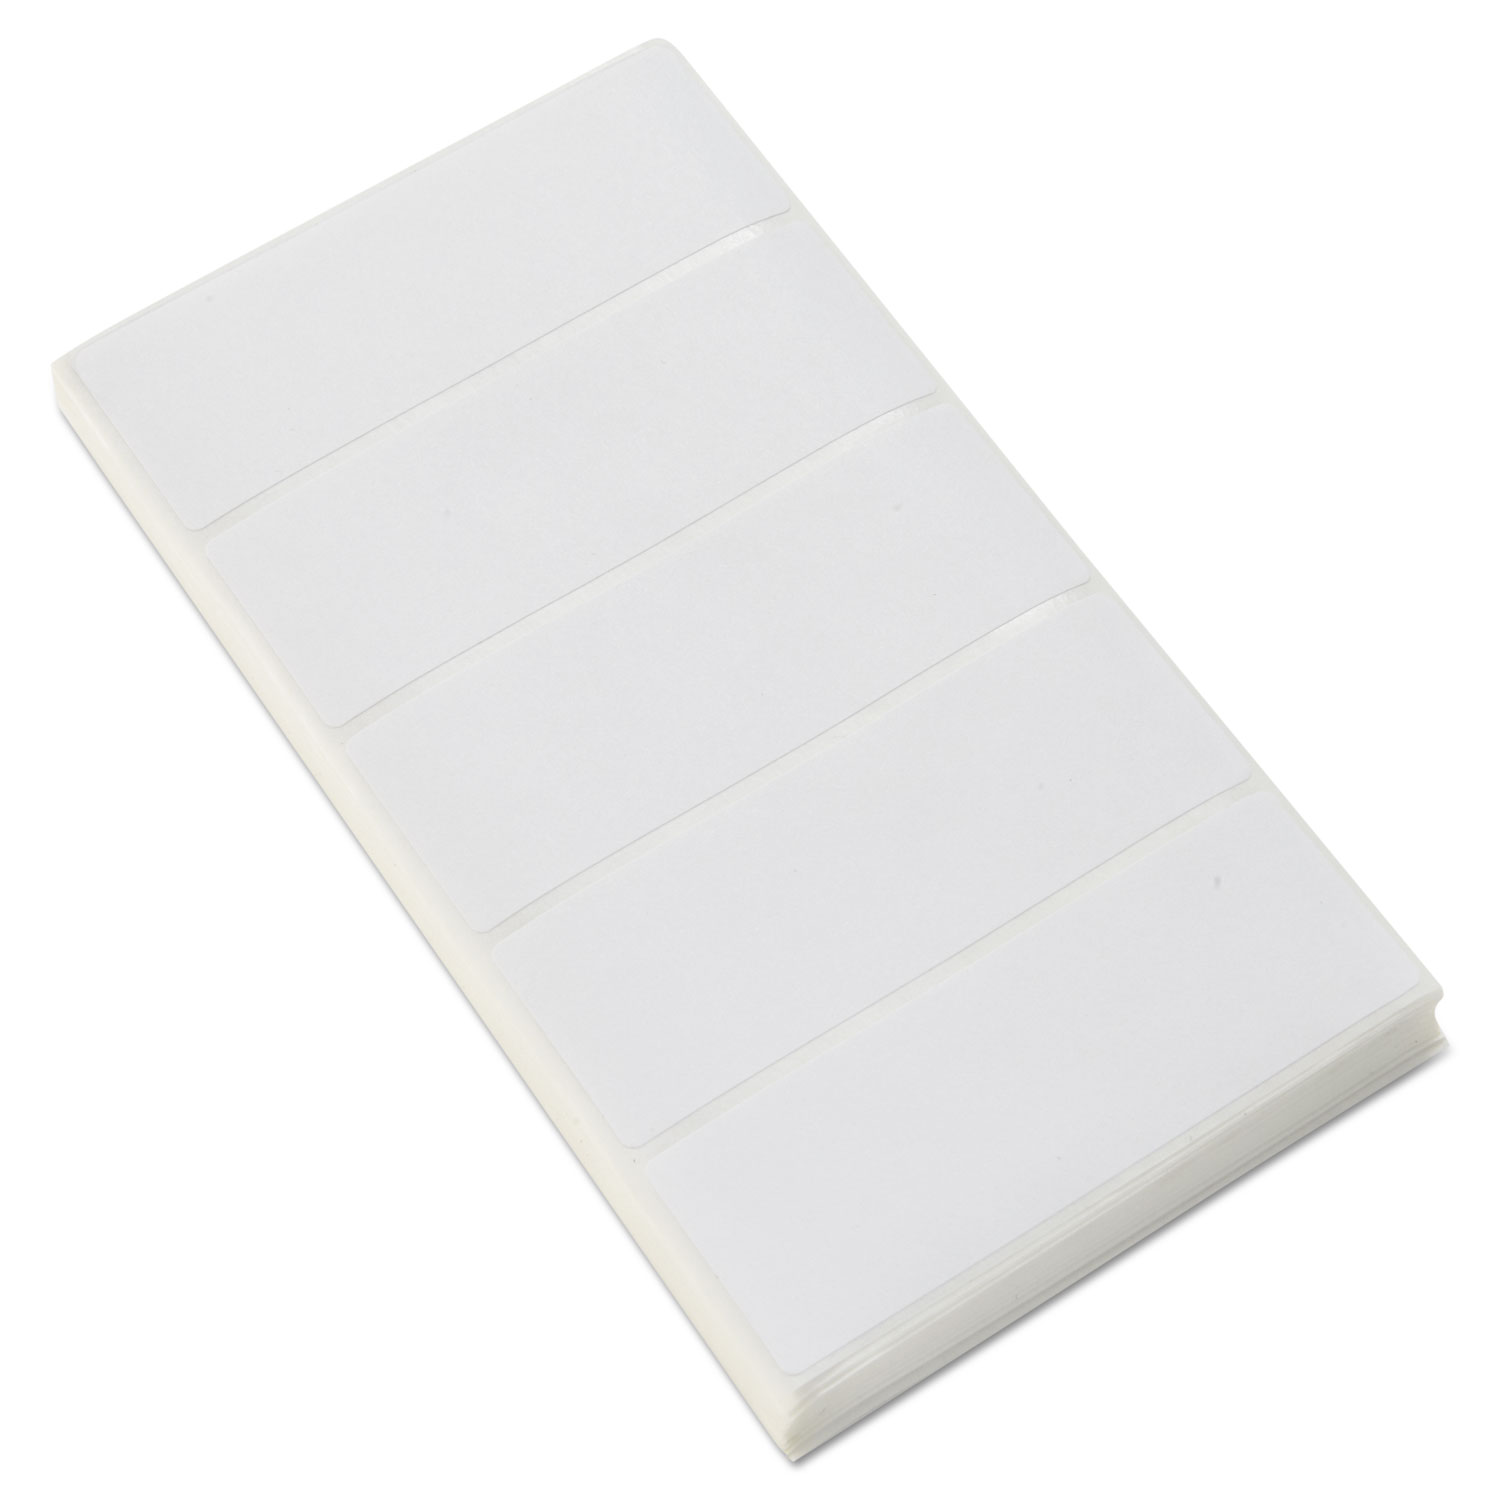 Removable Self-Adhesive Multi-Use Labels, 1 x 3, White, 250/Pack